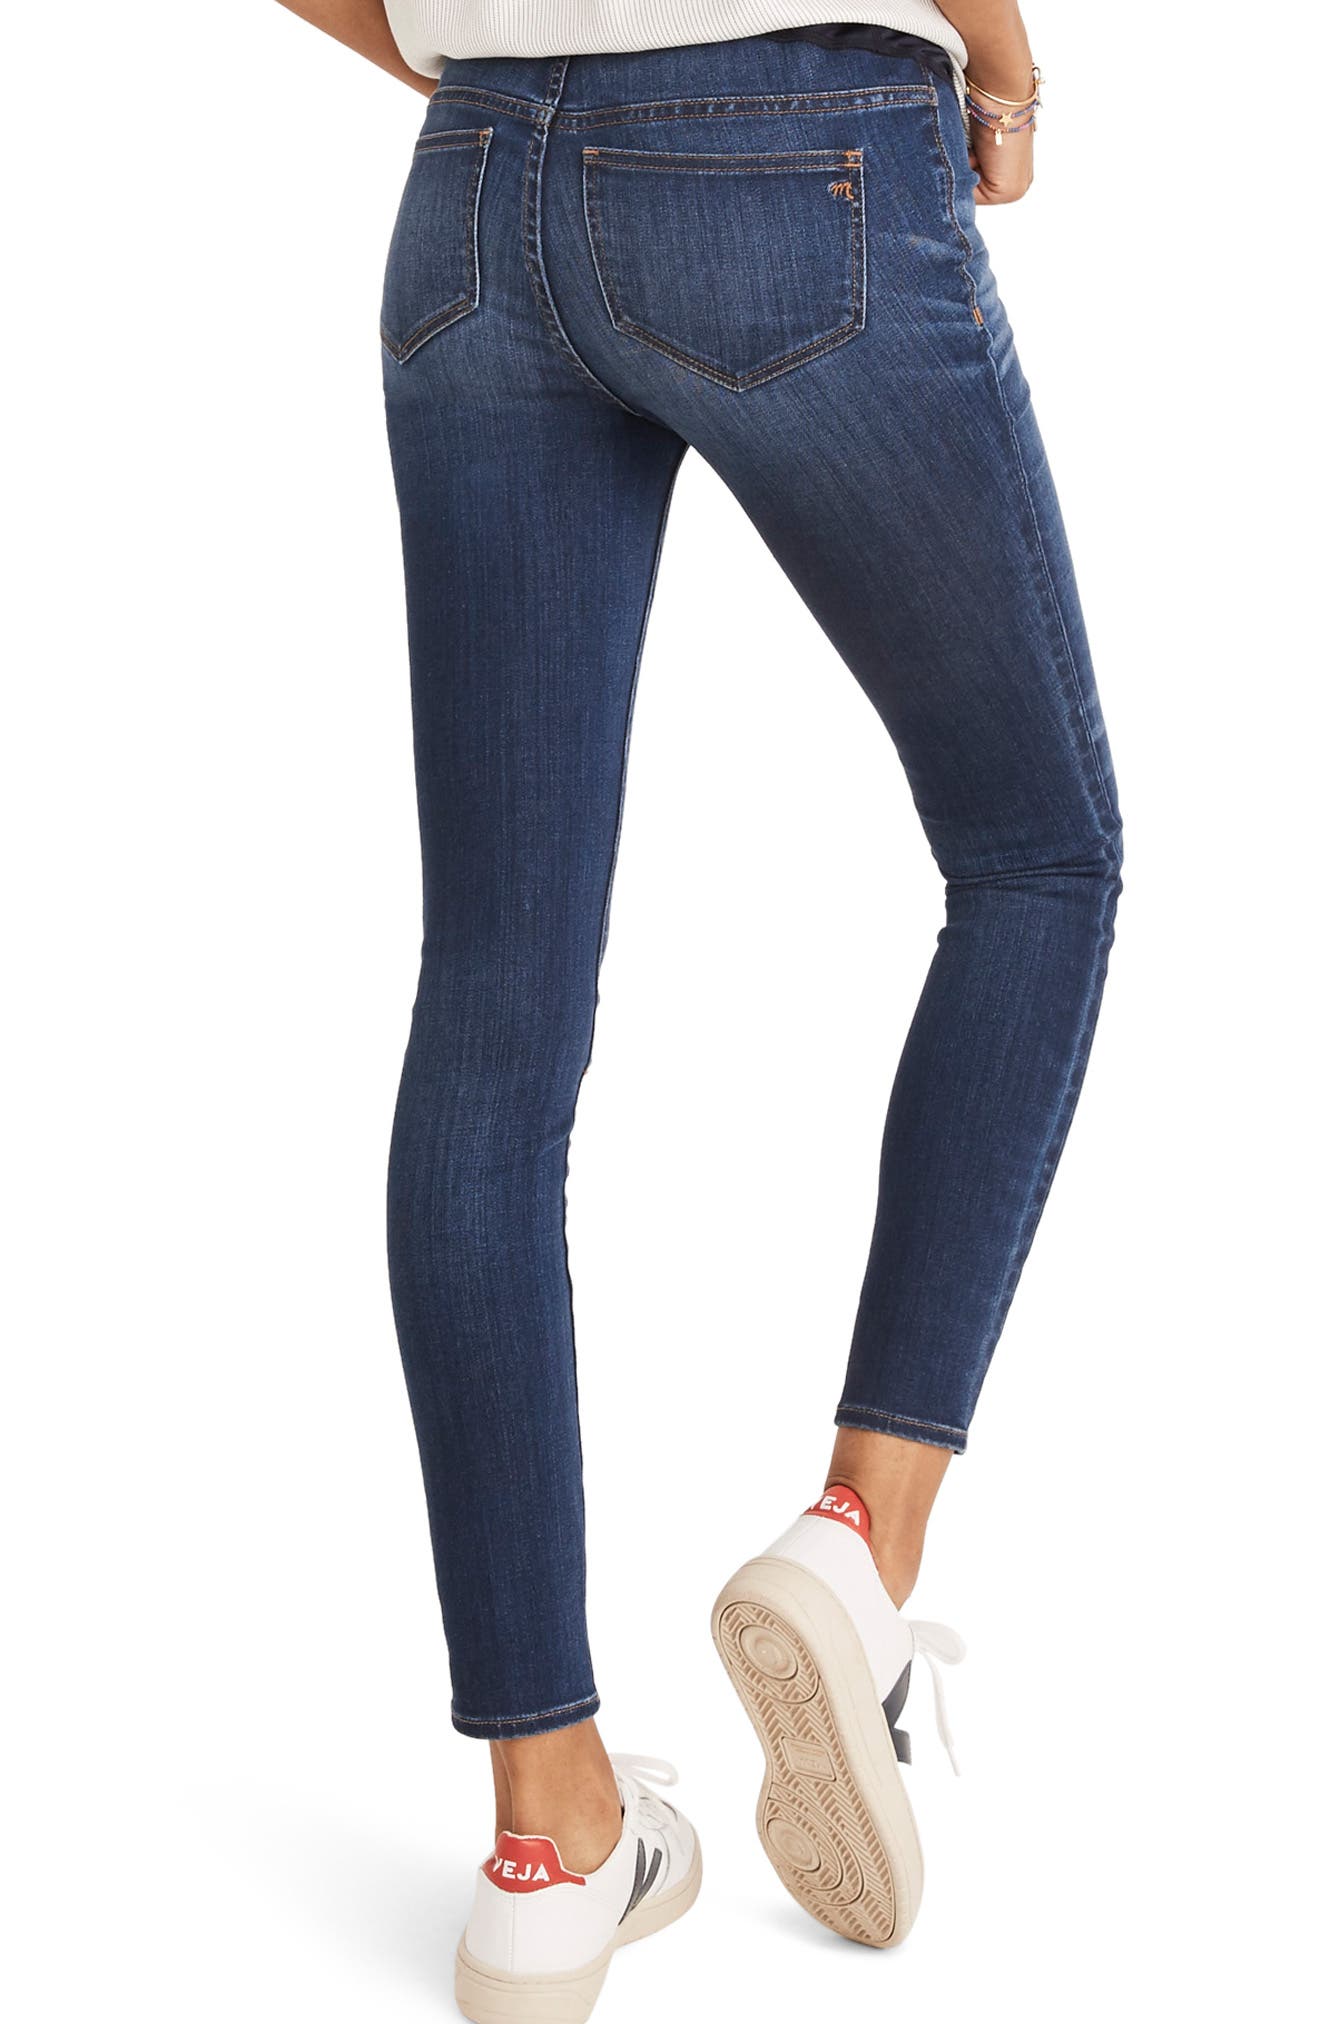 Womens Clothing Jeans Skinny jeans Madewell Denim Maternity Over-the-belly Skinny Jeans in Blue 